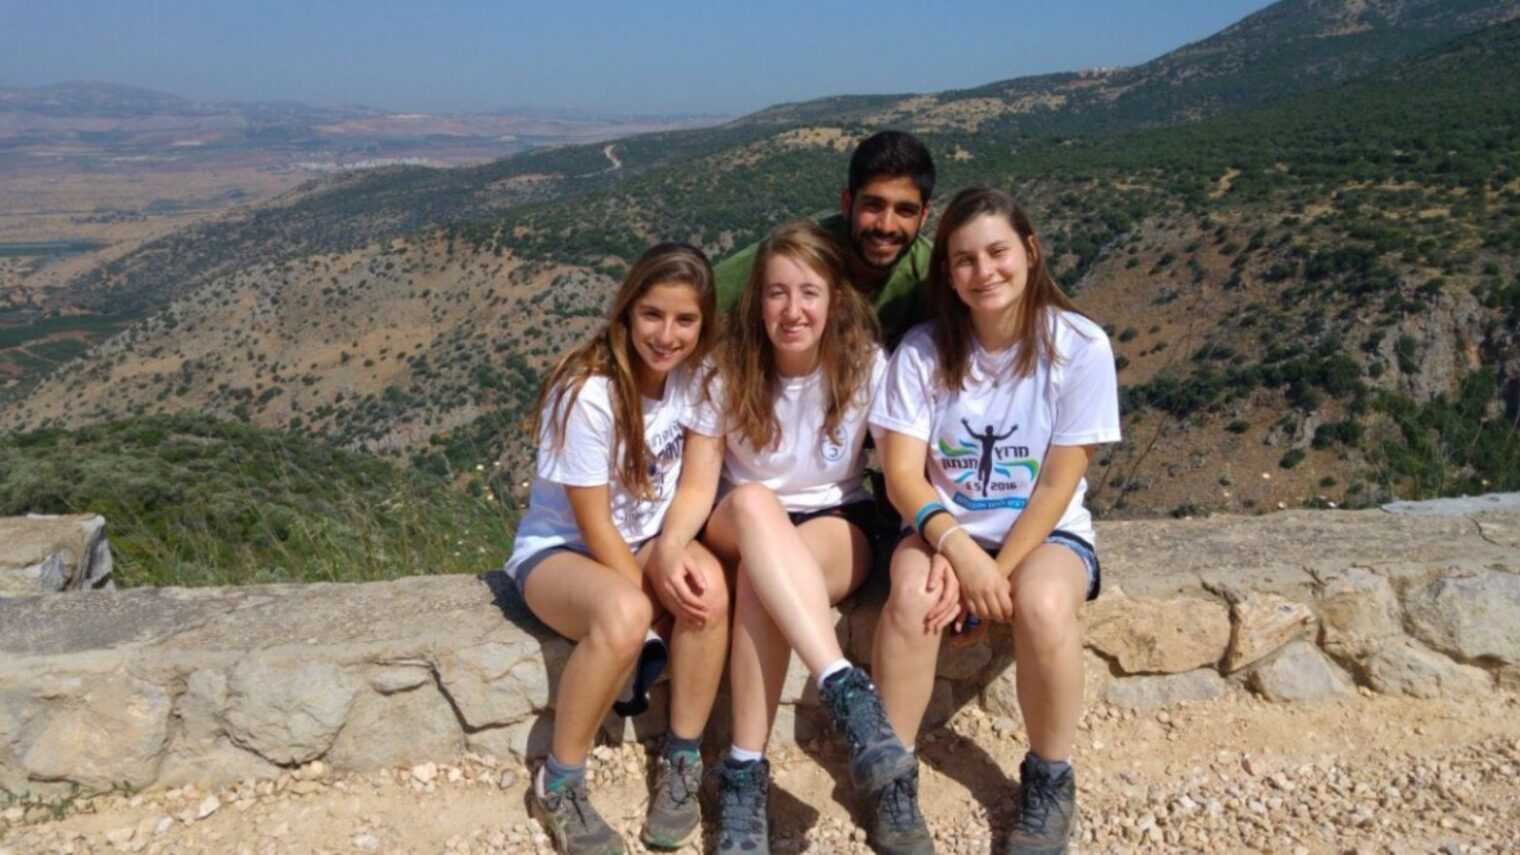 Members of Kibbutz Hannaton’s mechina volunteer in the local community and engage with neighboring Arab villagers to facilitate dialogue and change. Photo: courtesy